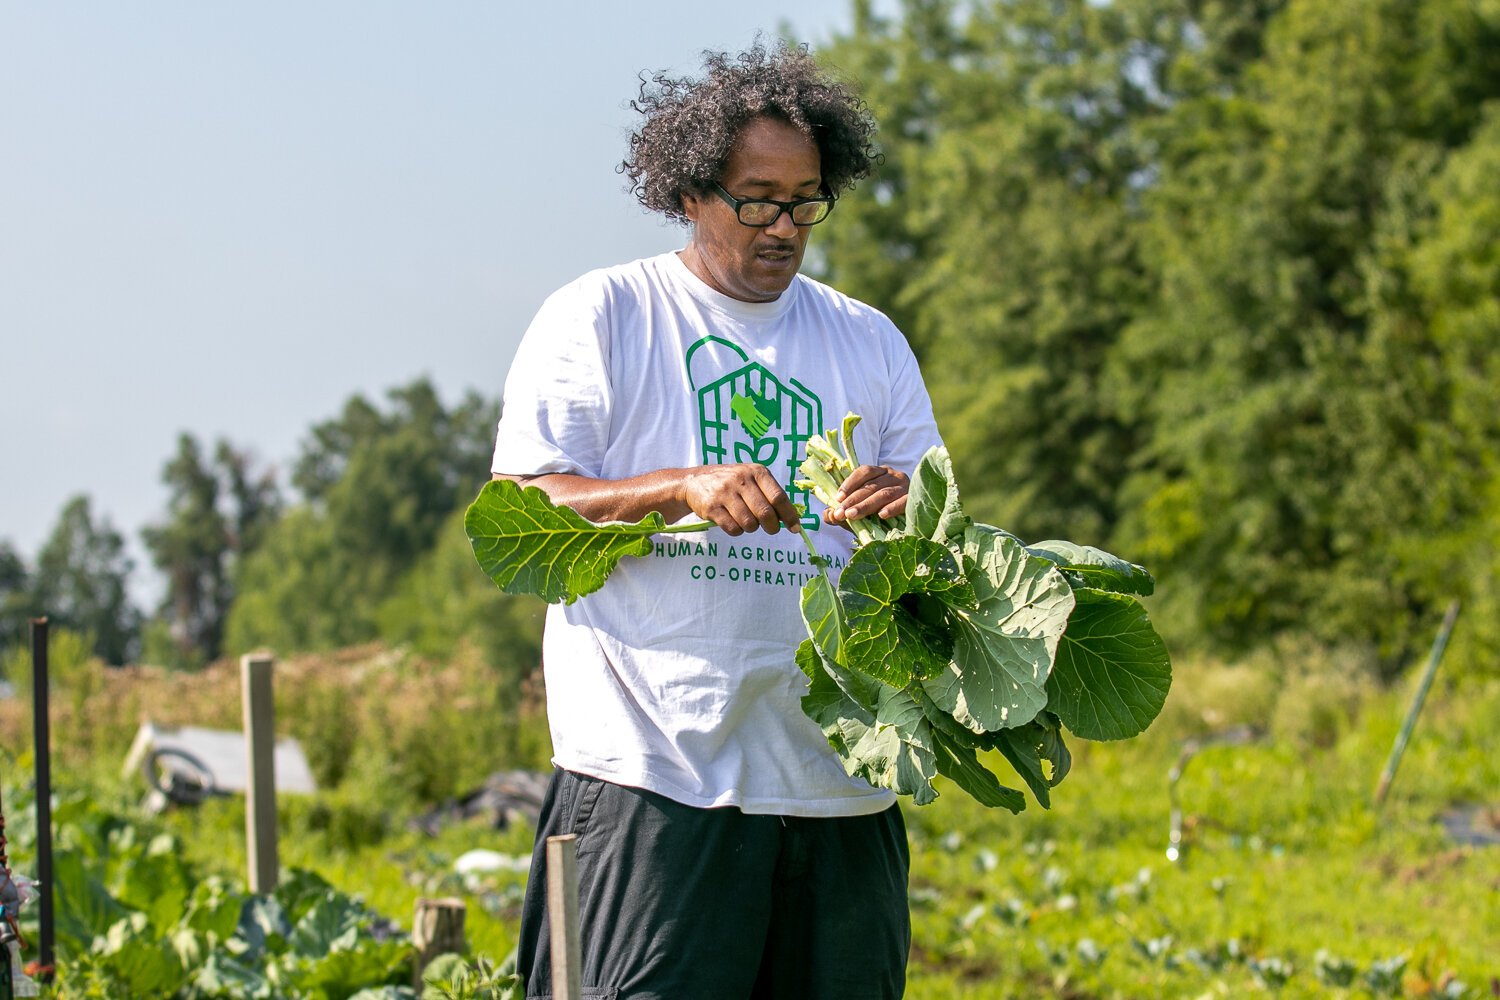 Ty Simmons is Director of the Human Agricultural Cooperative.